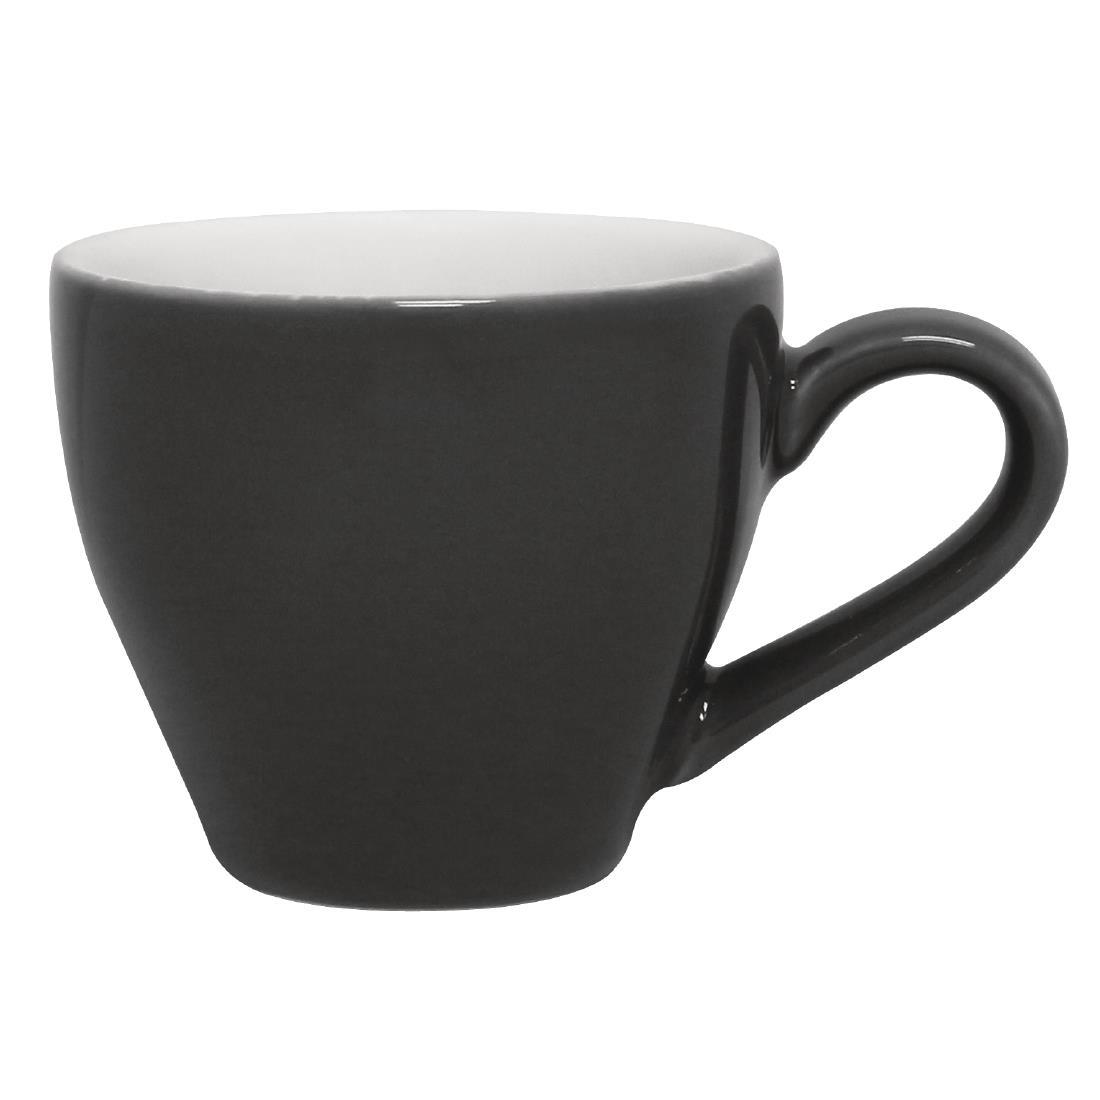 Olympia Cafe Espresso Cups Charcoal 100ml (Pack of 12) - GK072  - 1